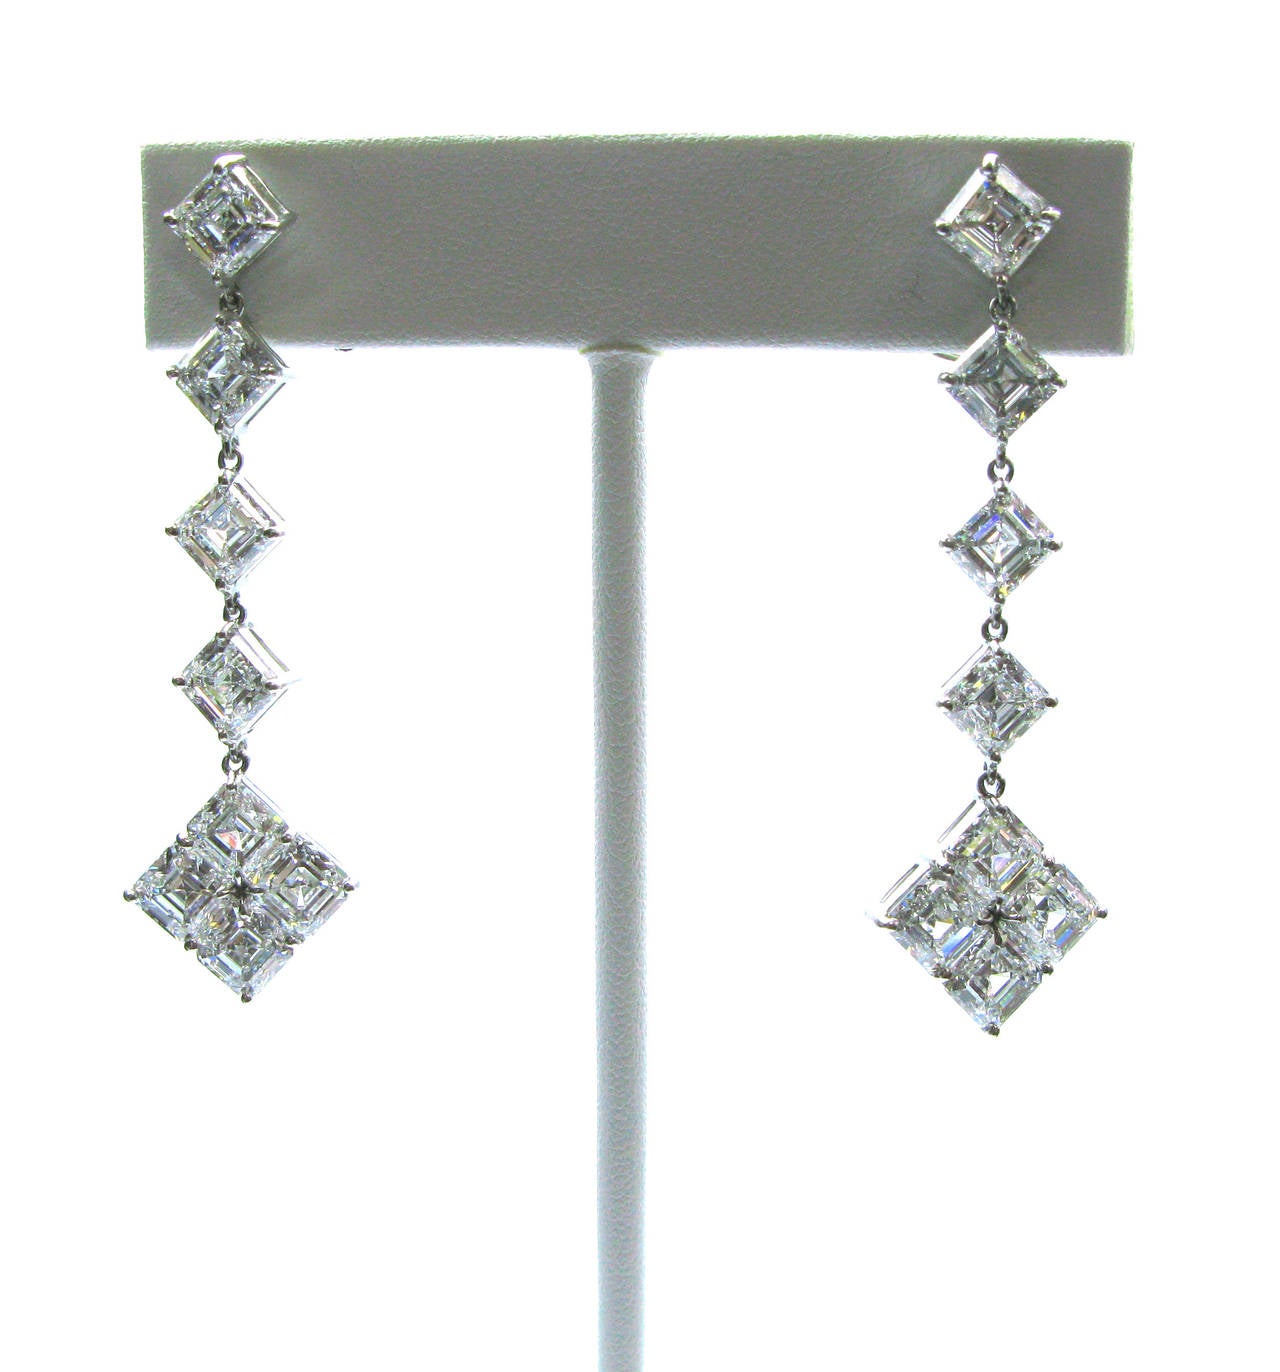 This spectacular pair of platinum earrings contains 16 GIA certified Asscher cut diamonds ranging in quality from D-F color and IF-VVS clarity. 

Each earring has a four diamond drop with a four diamond cluster at the bottom. These stunning earrings